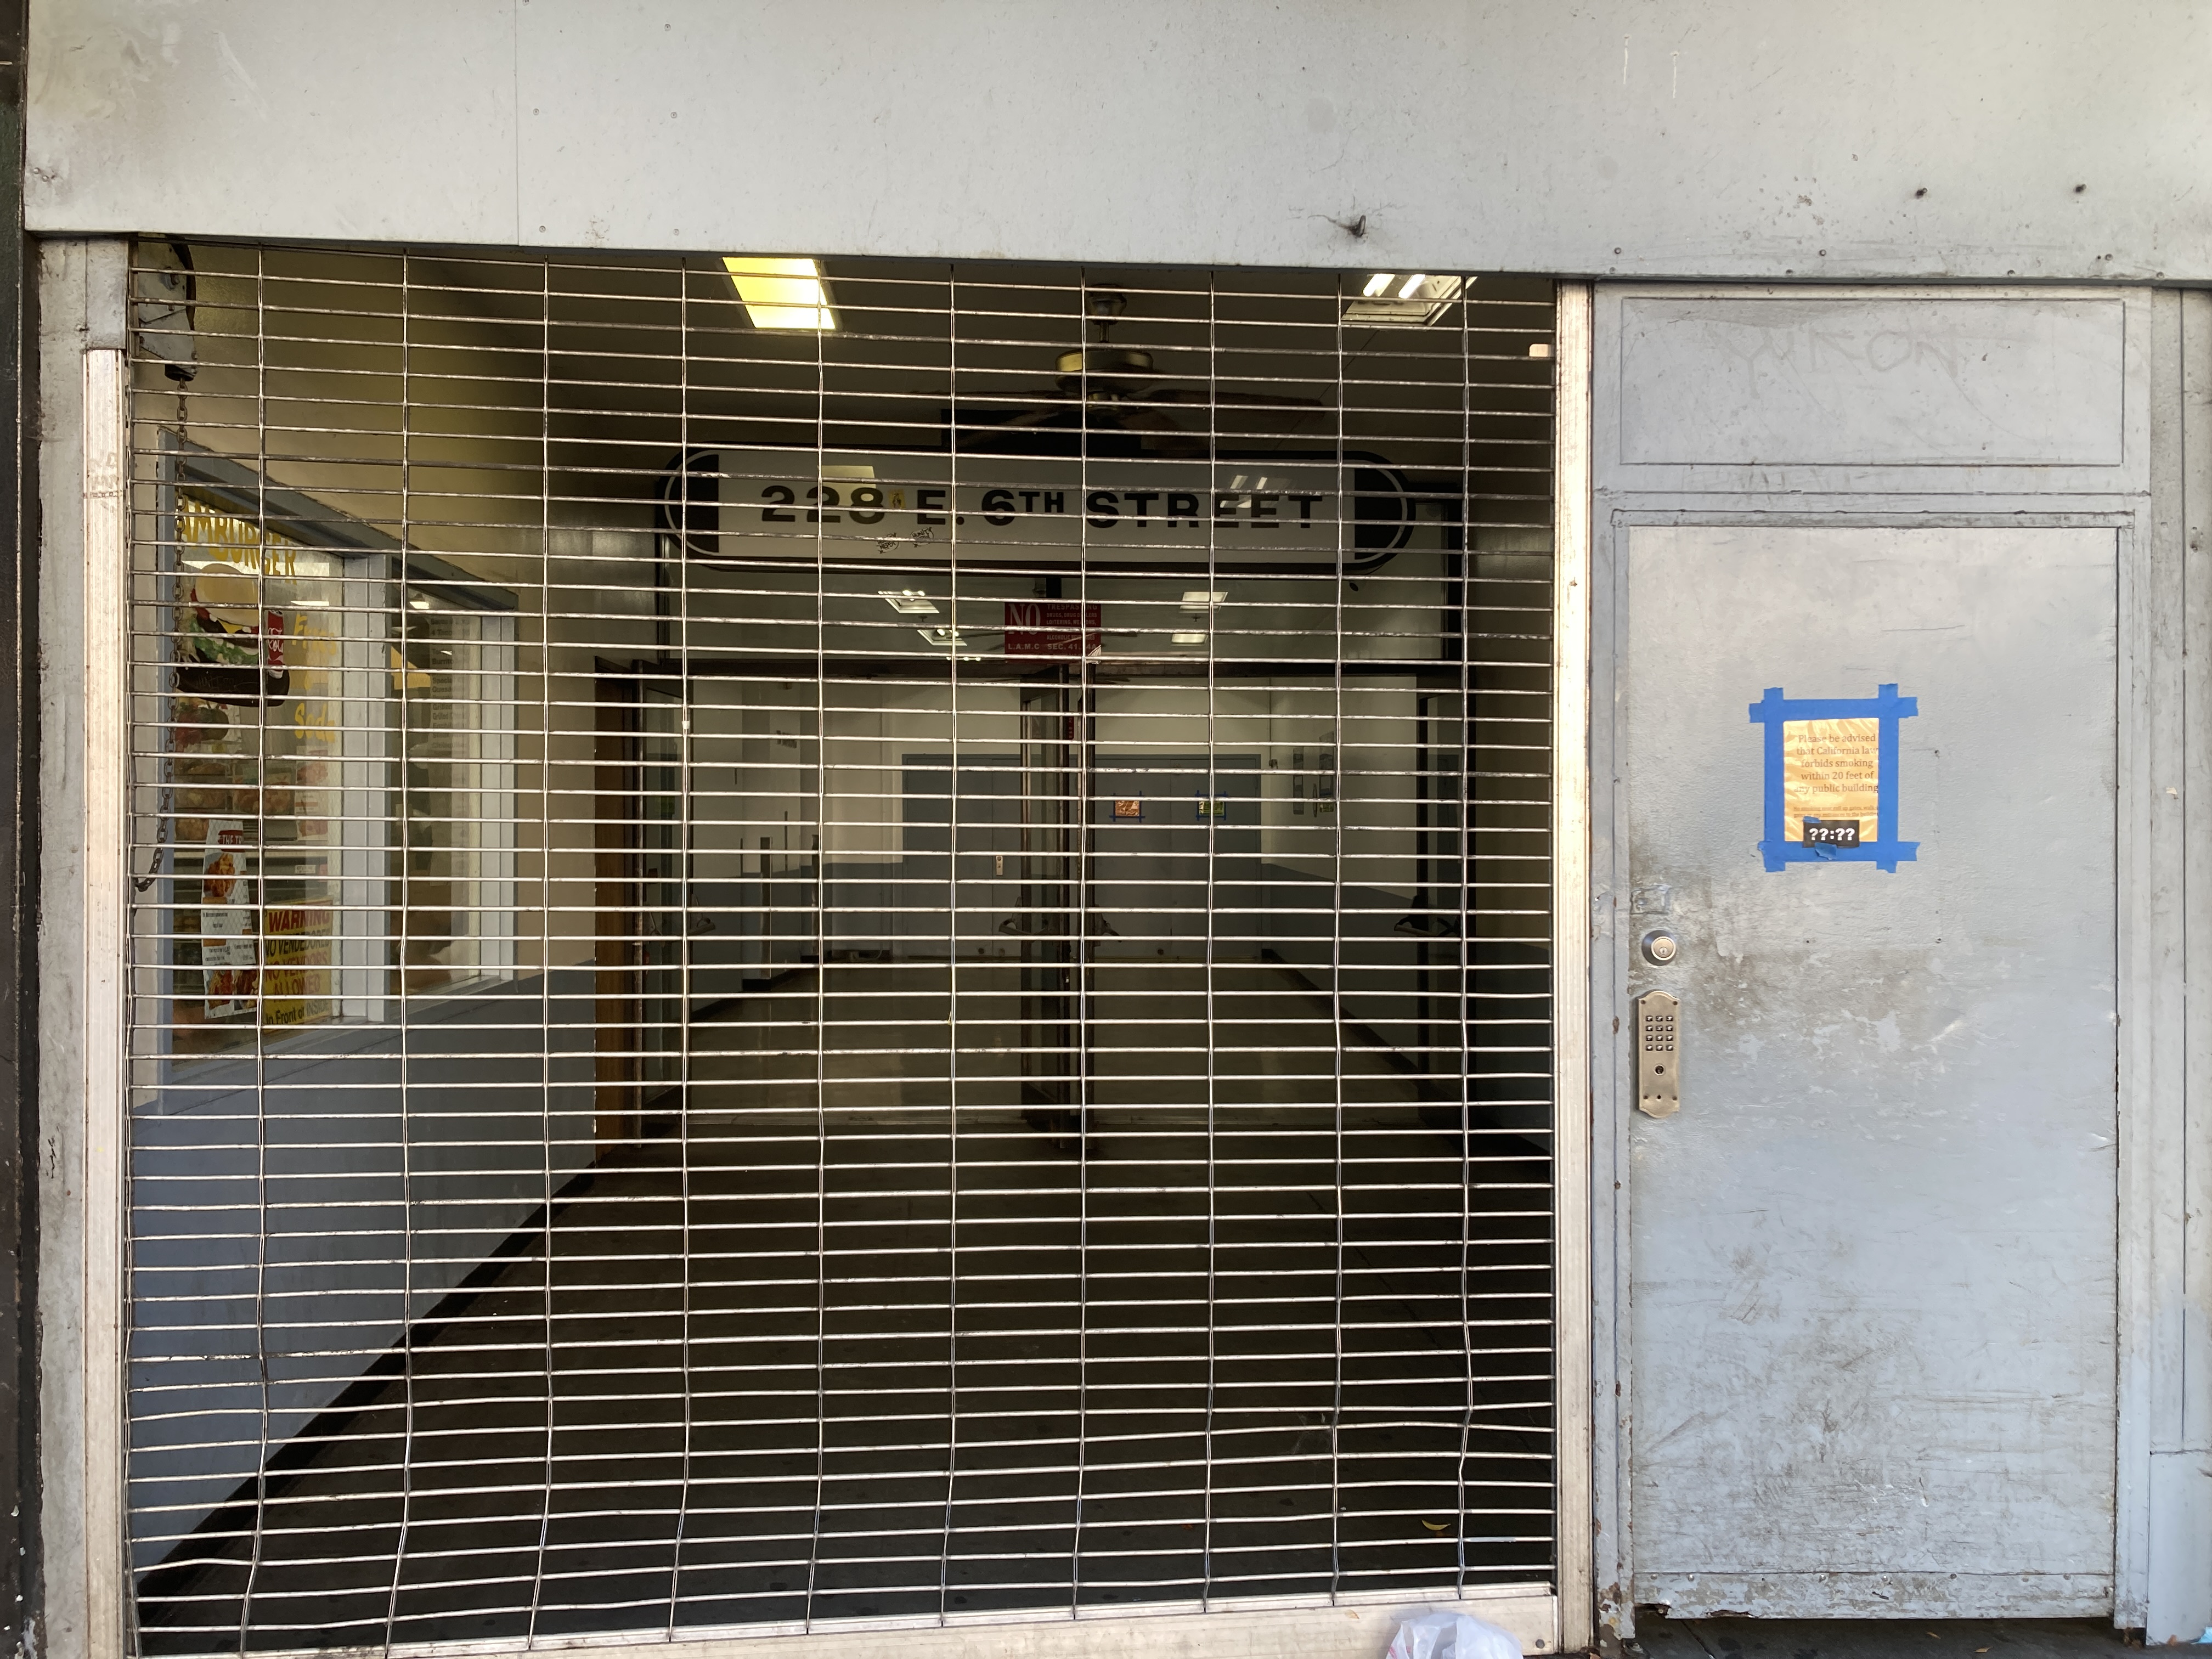 an alcove in the facade of the building is enclosed by a roll-down grated gate, through which can be seen four blue metal doors and a lozenge-shaped sign reading 228 E 6TH STREET